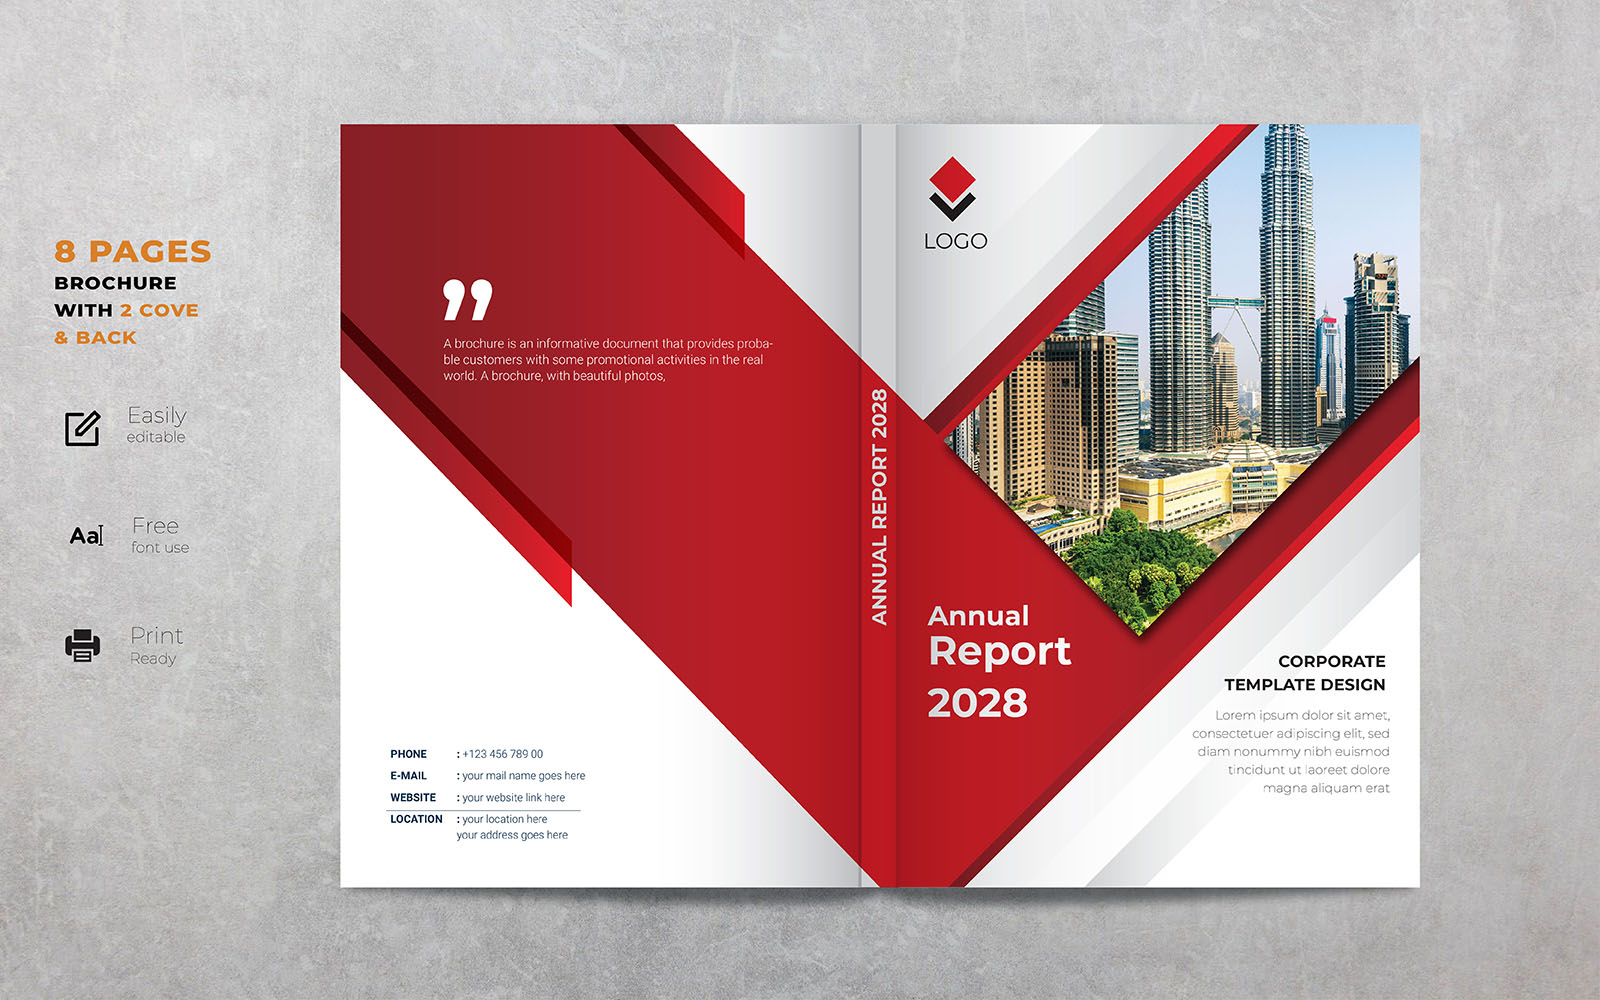 Creative Abstract  8 Page Business Brochure Template Annual Report Company Profile Design